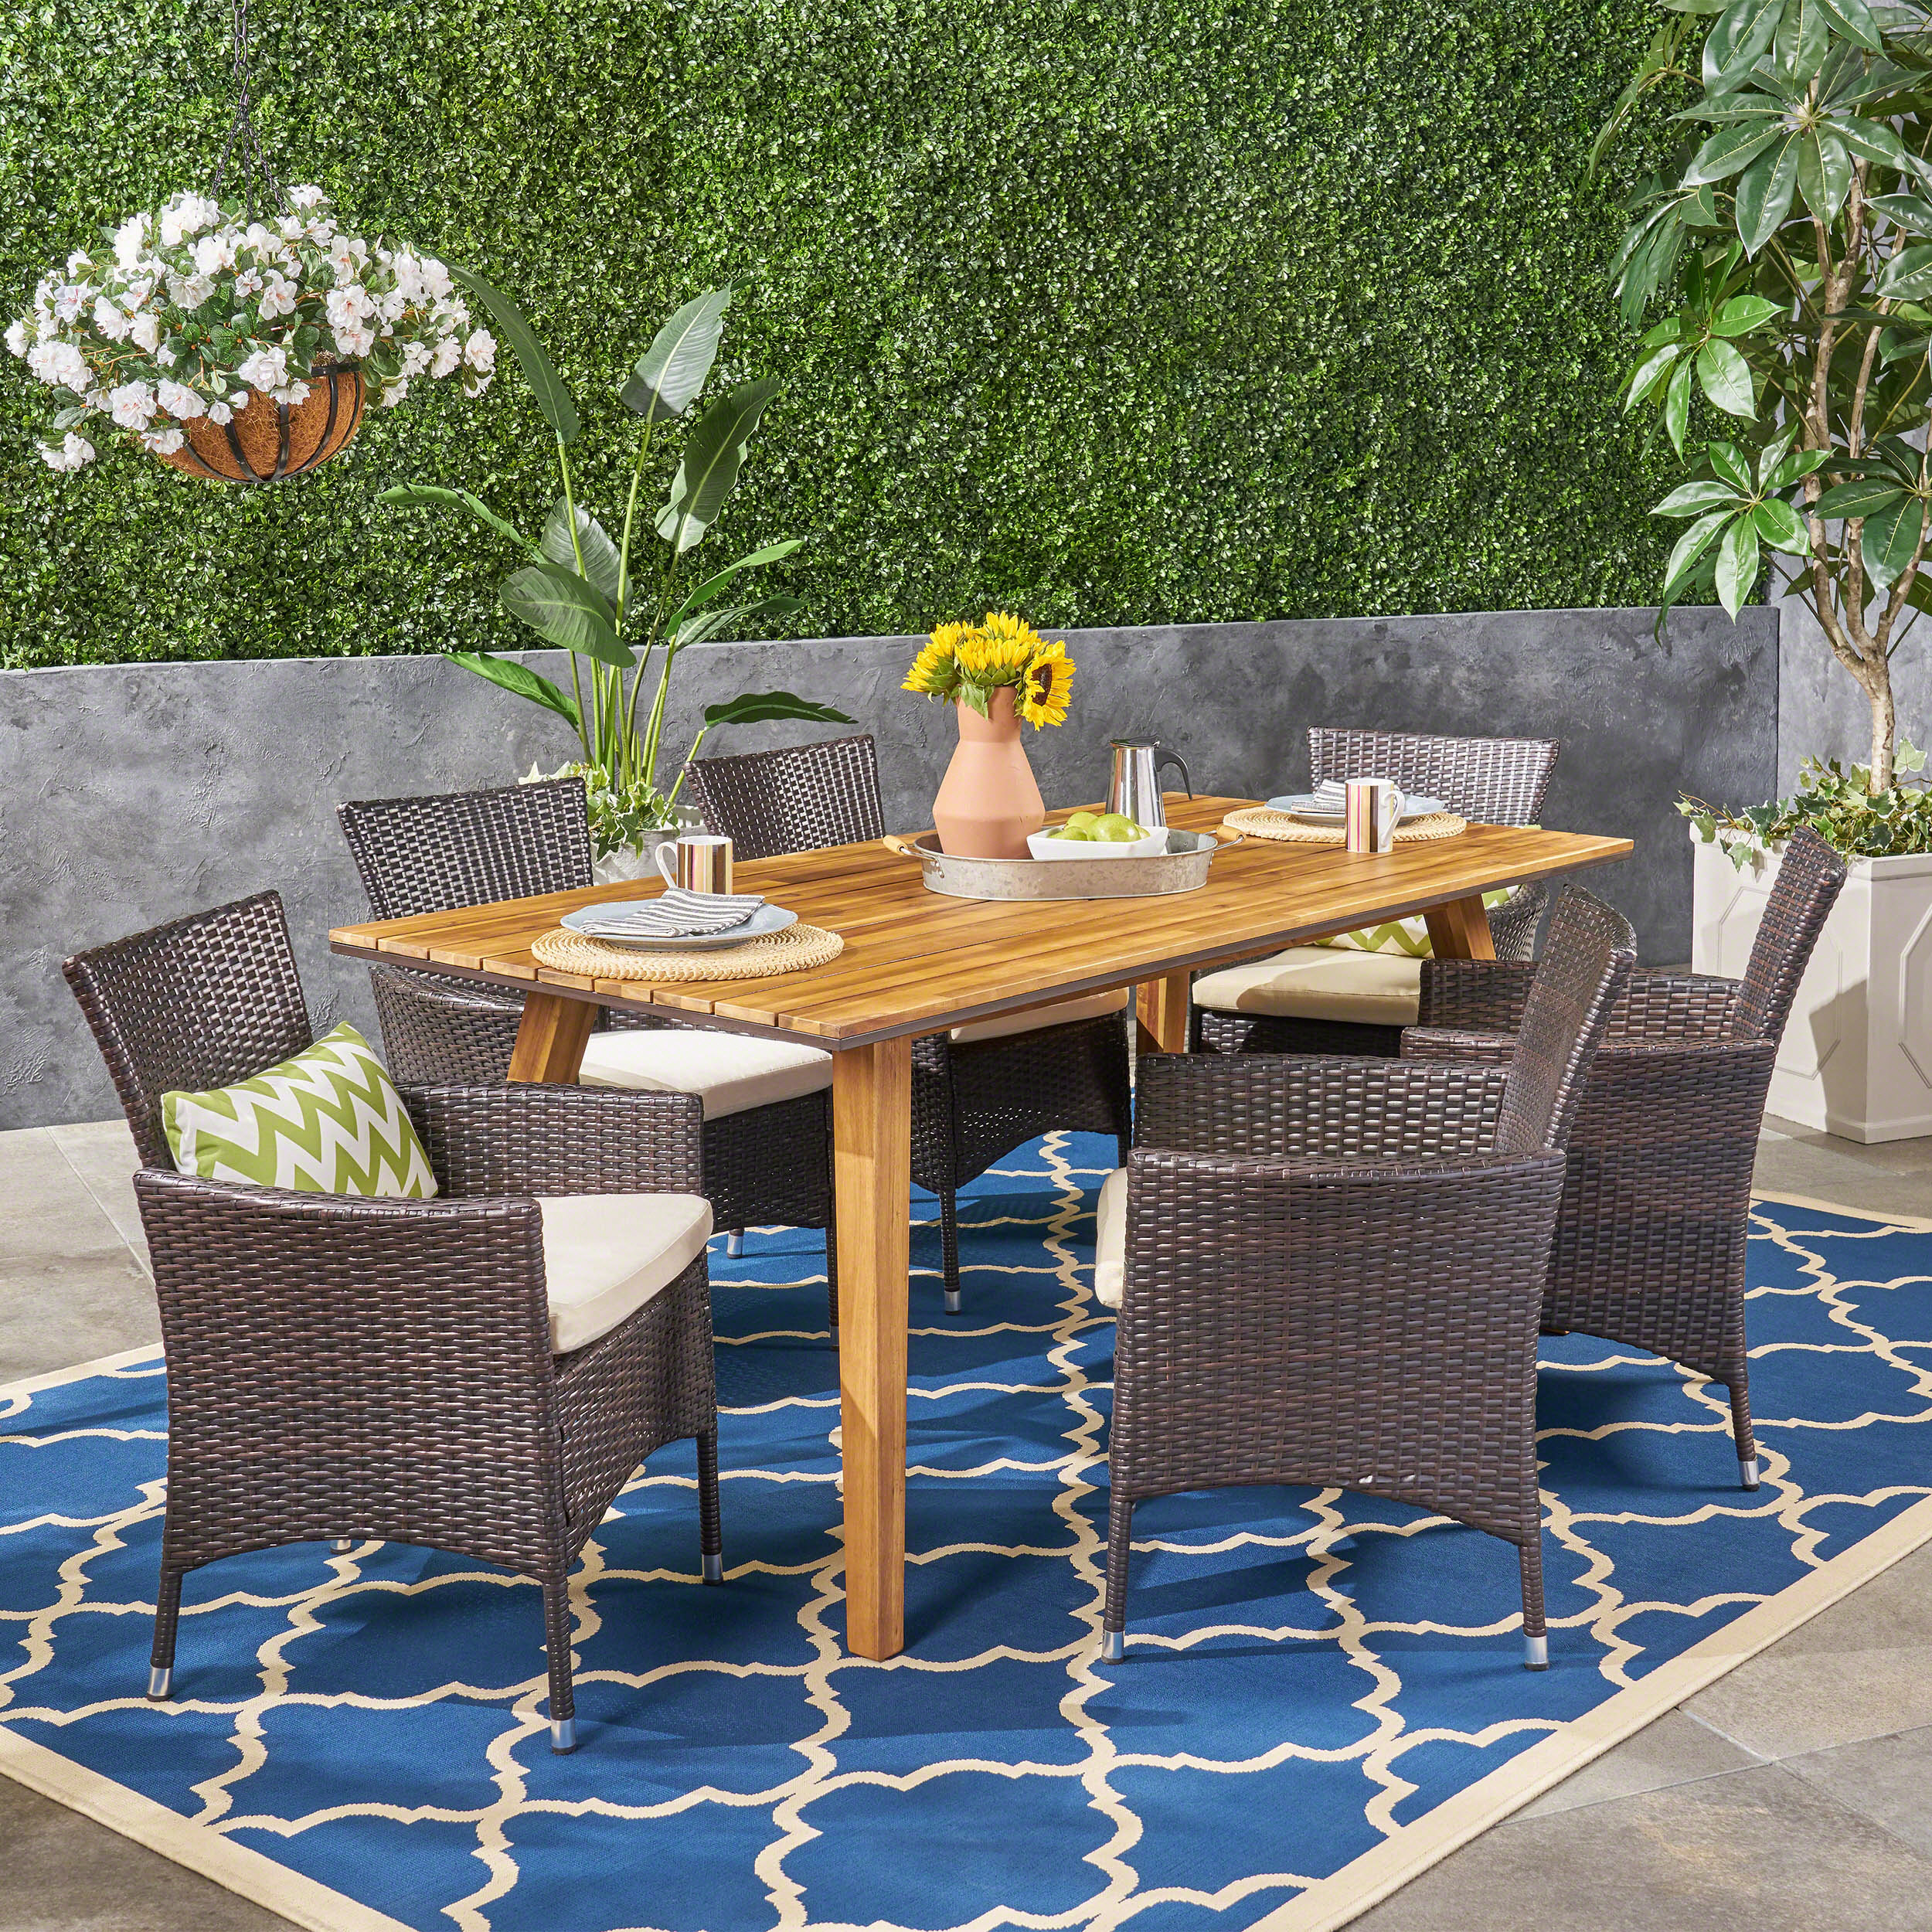 Liam Outdoor 7 Piece Acacia Wood Dining Set with Wicker Chairs, Teak Finish - image 1 of 10